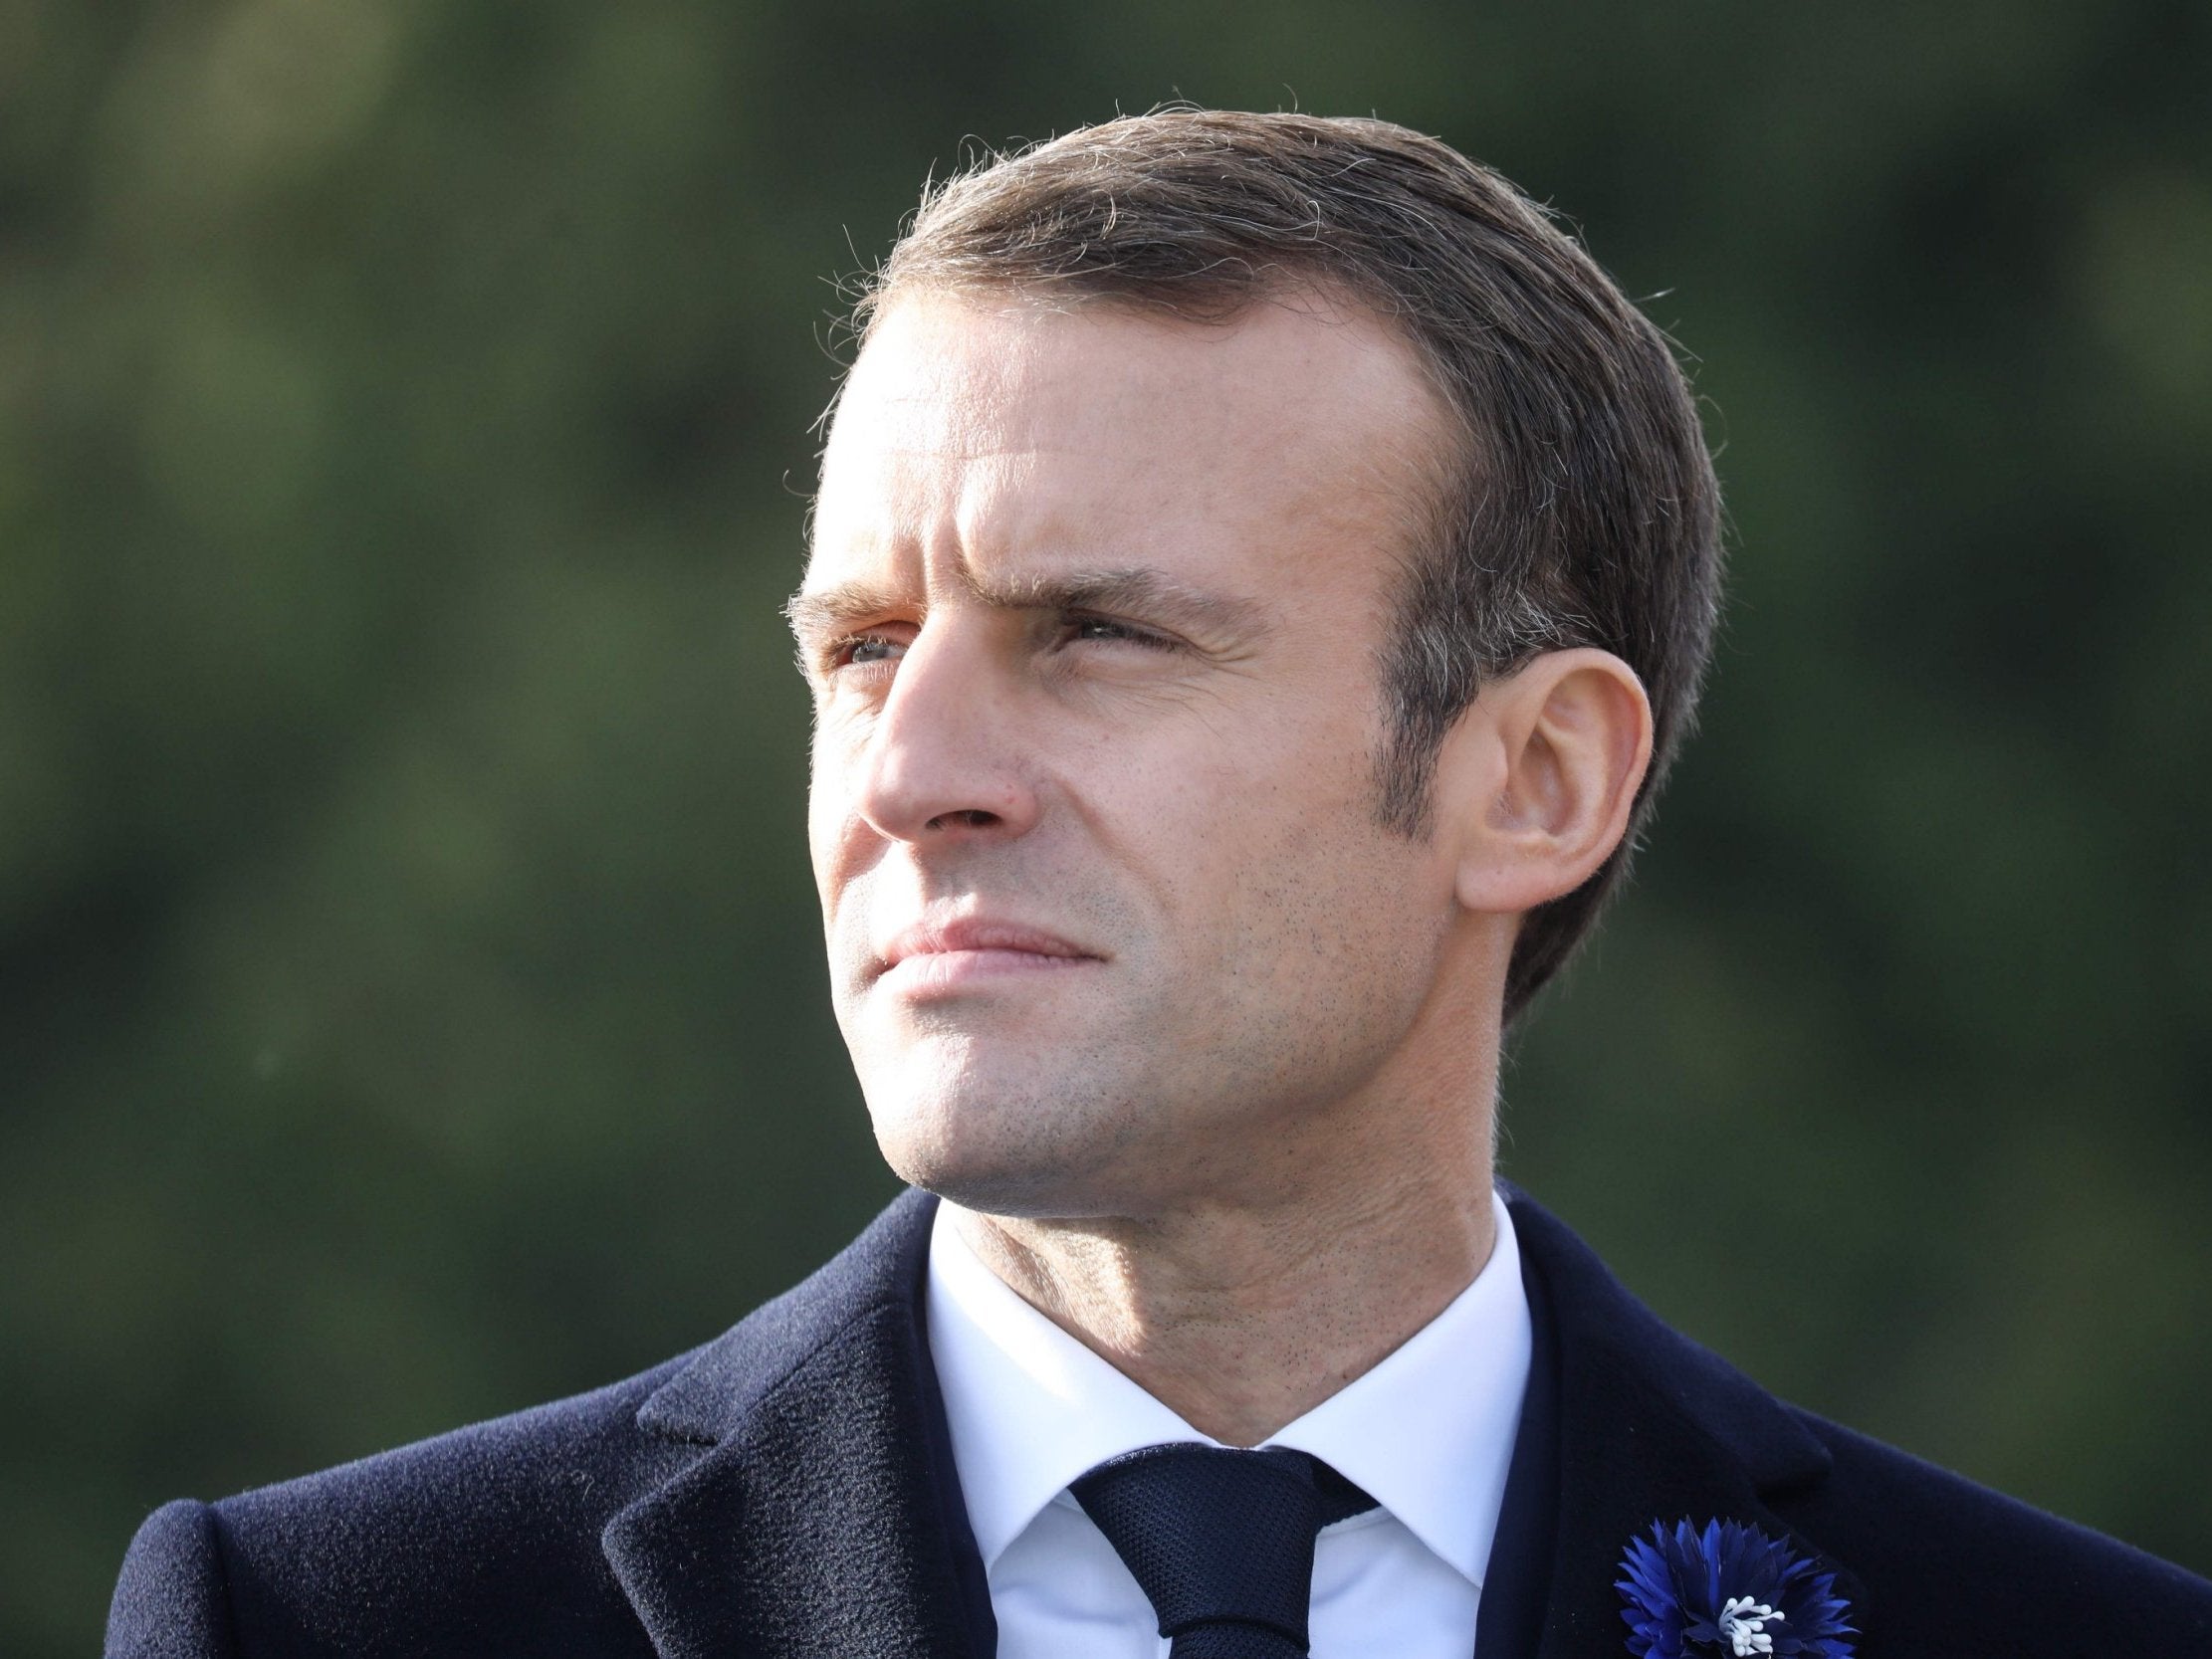 Six people have been arrested on suspicion of plotting to attack French president Emmanuel Macron